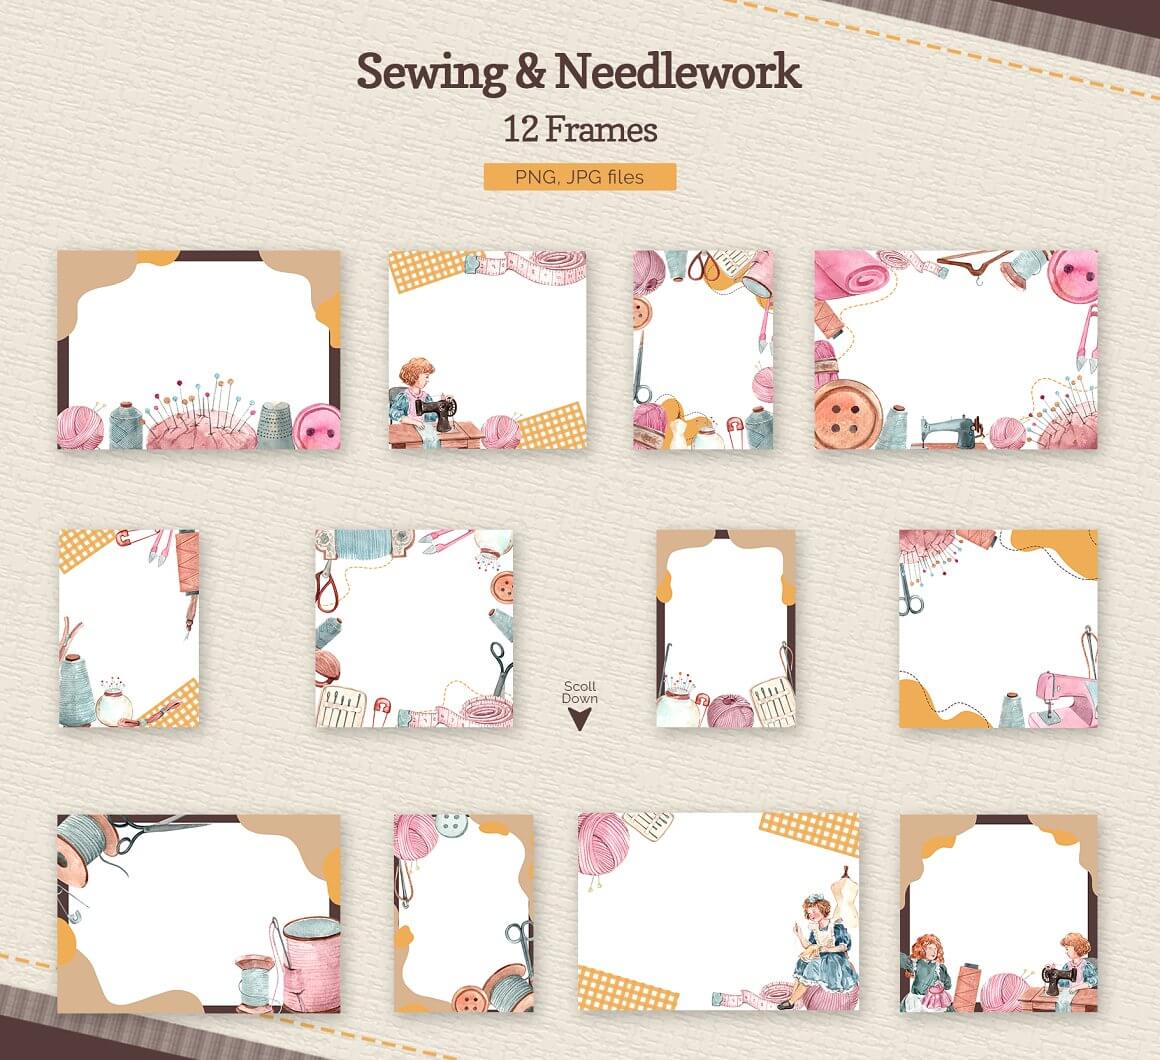 12 frames with frames for sewing elements.